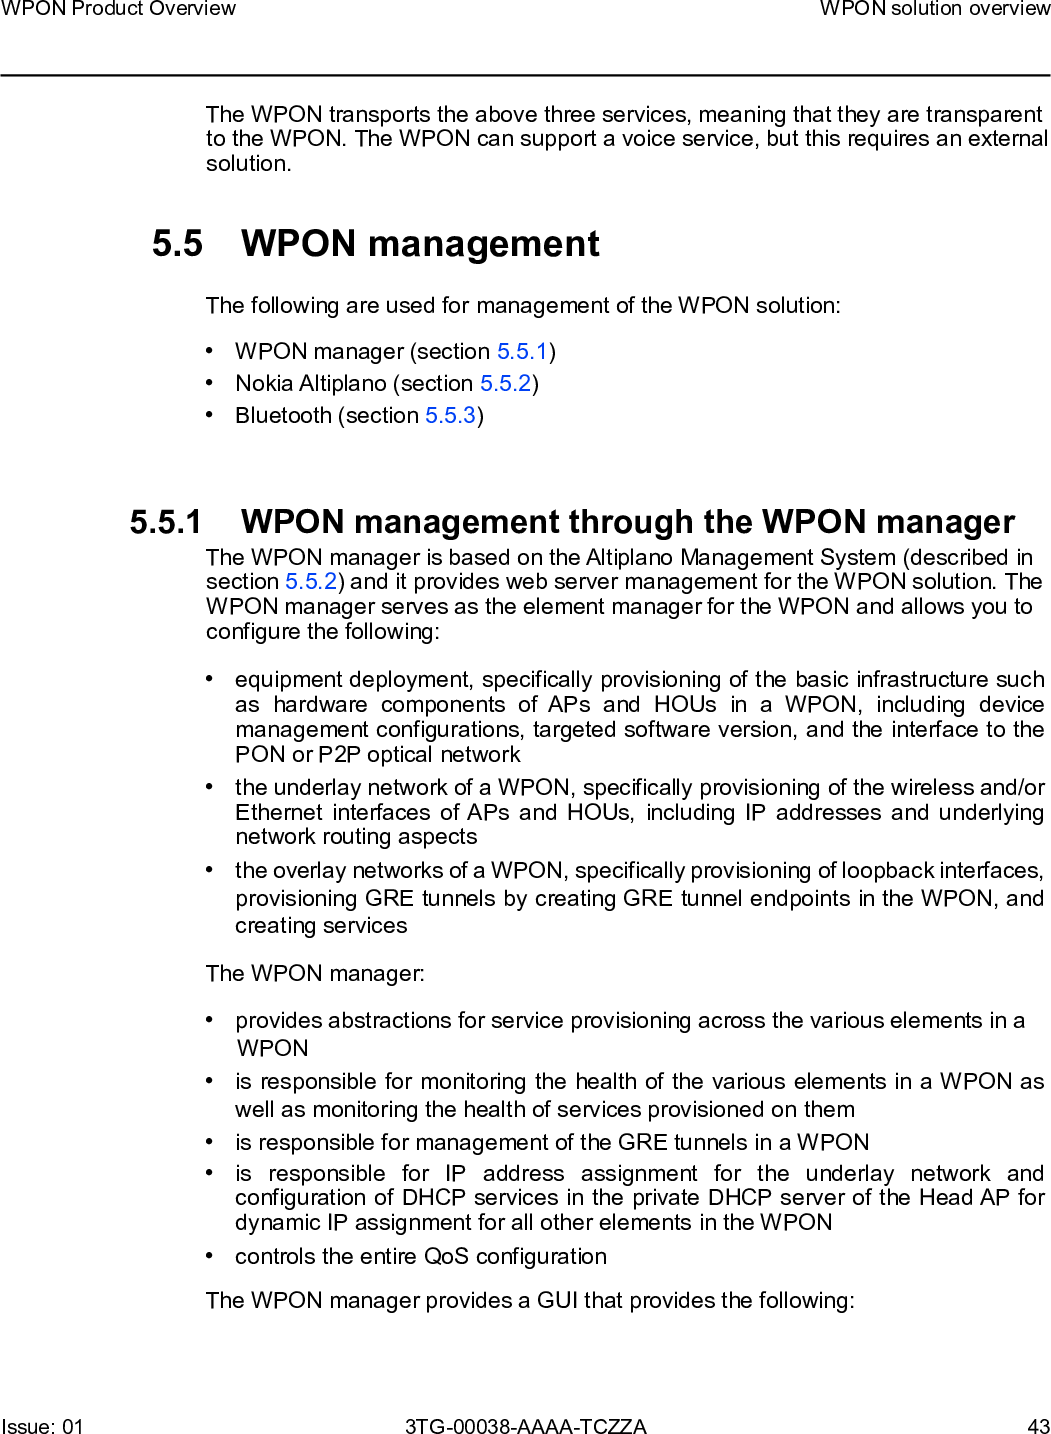 Page 43 of Nokia Bell 7577WPONAPDC WPON User Manual WPON Product Overview